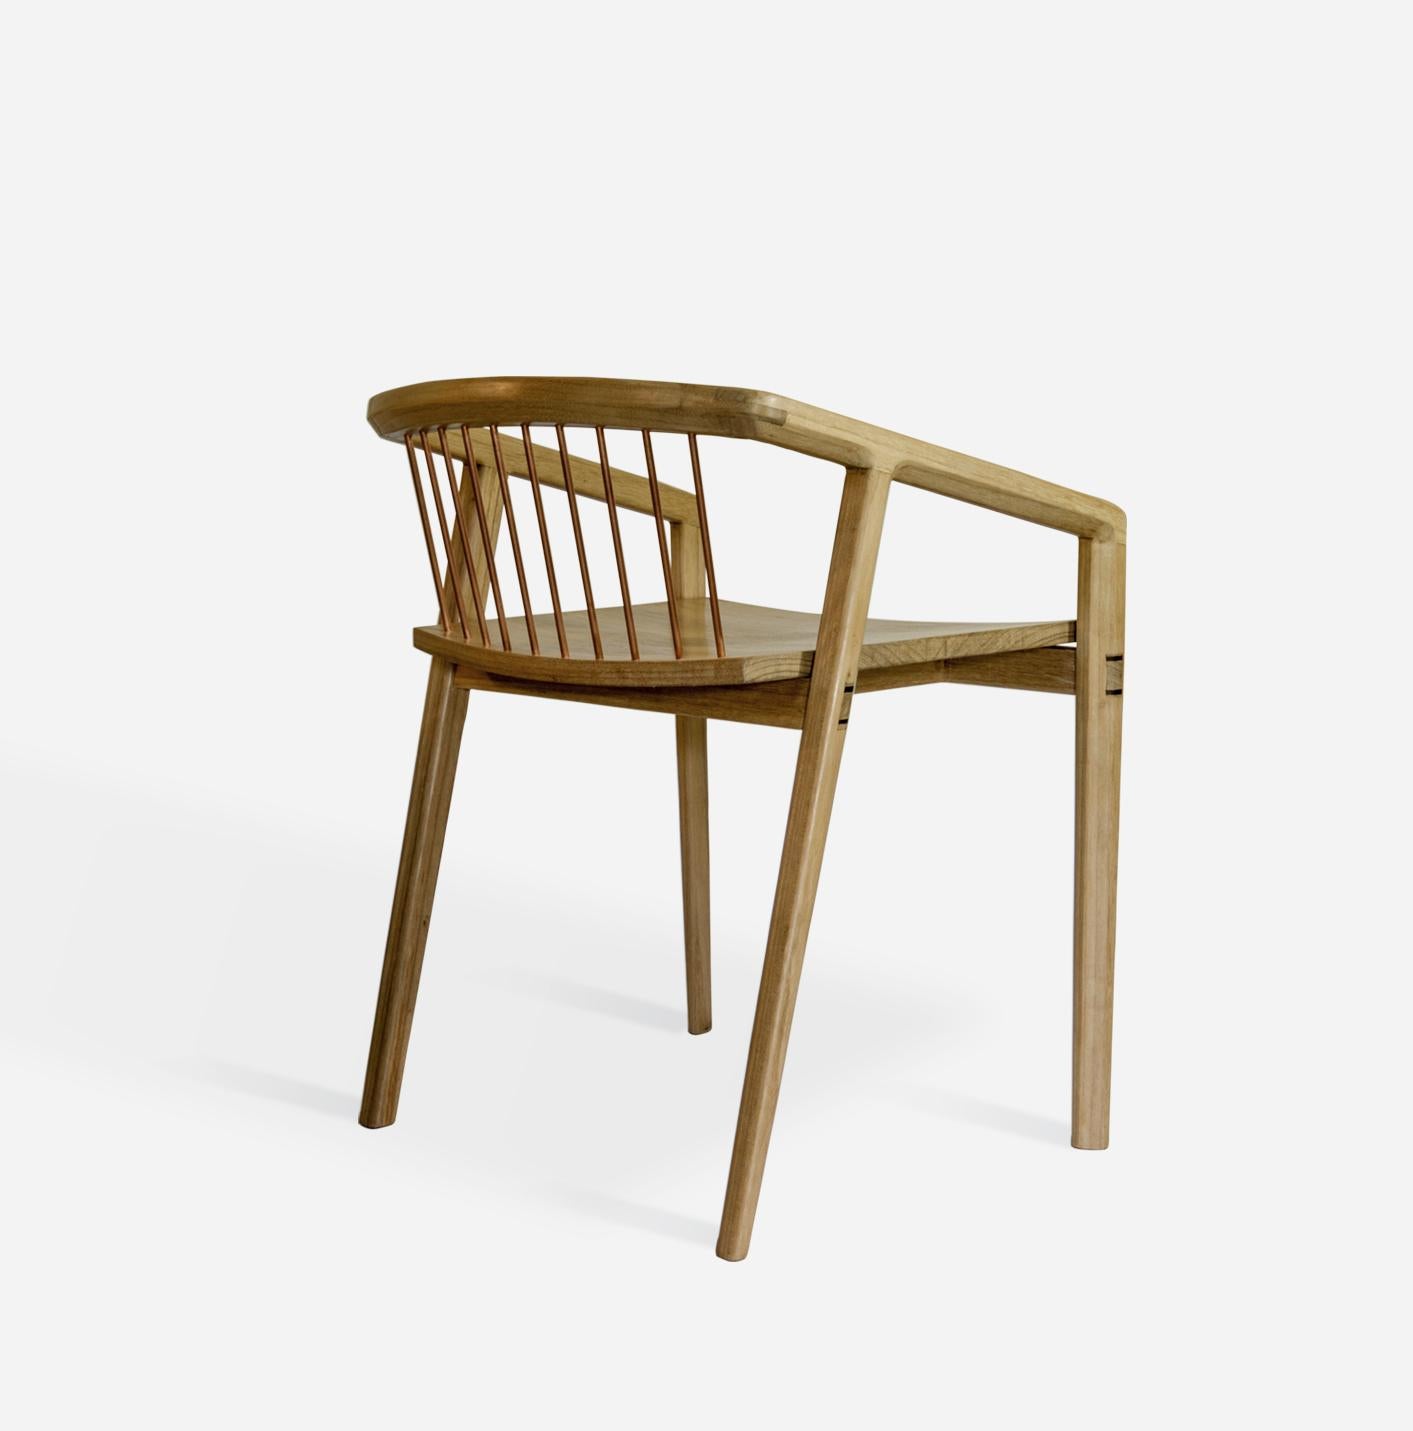 'Canelinha' Mid-Century Modern Chair in Brazilian Hardwood by Knót Artesanal In New Condition For Sale In Paraty, Rio de Janeiro